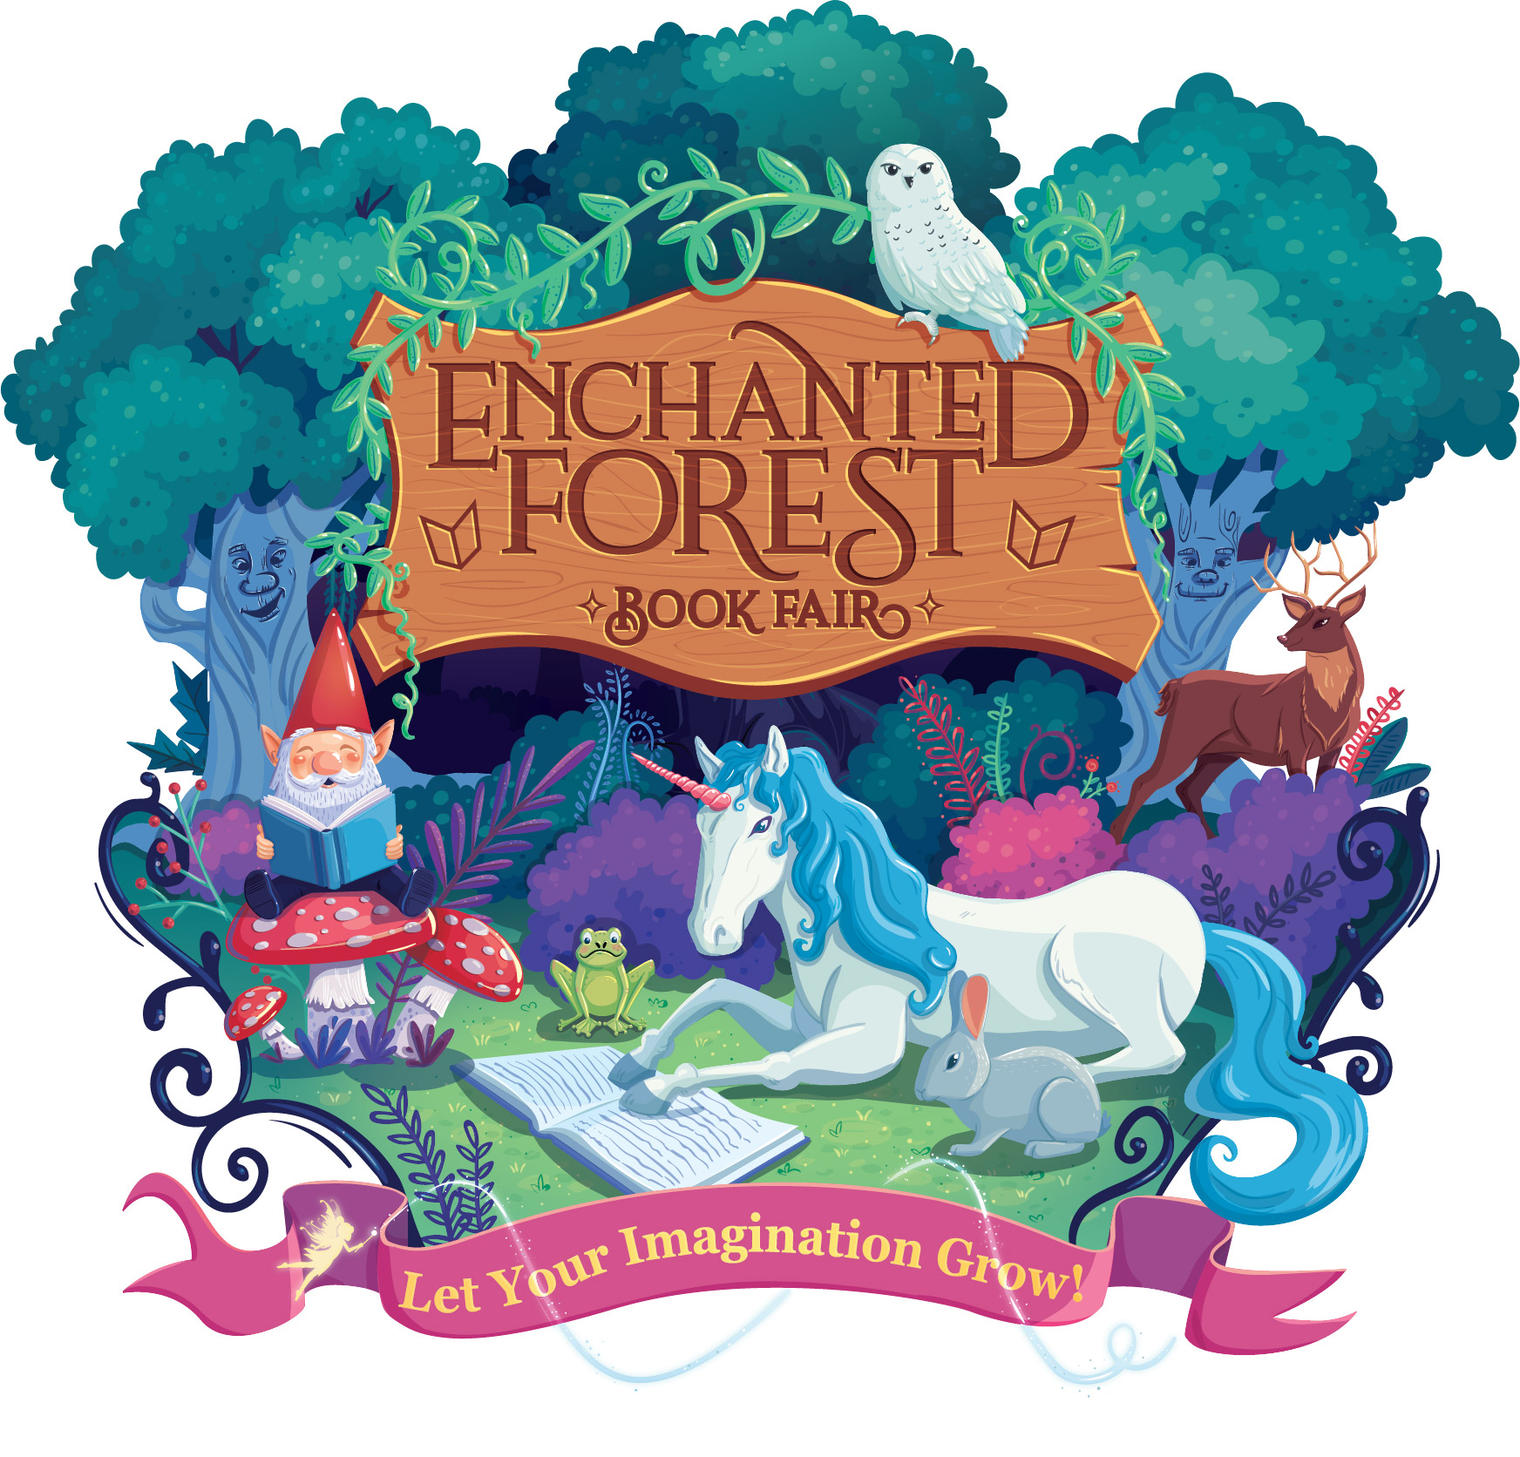 Enchanted Forest Bookfair